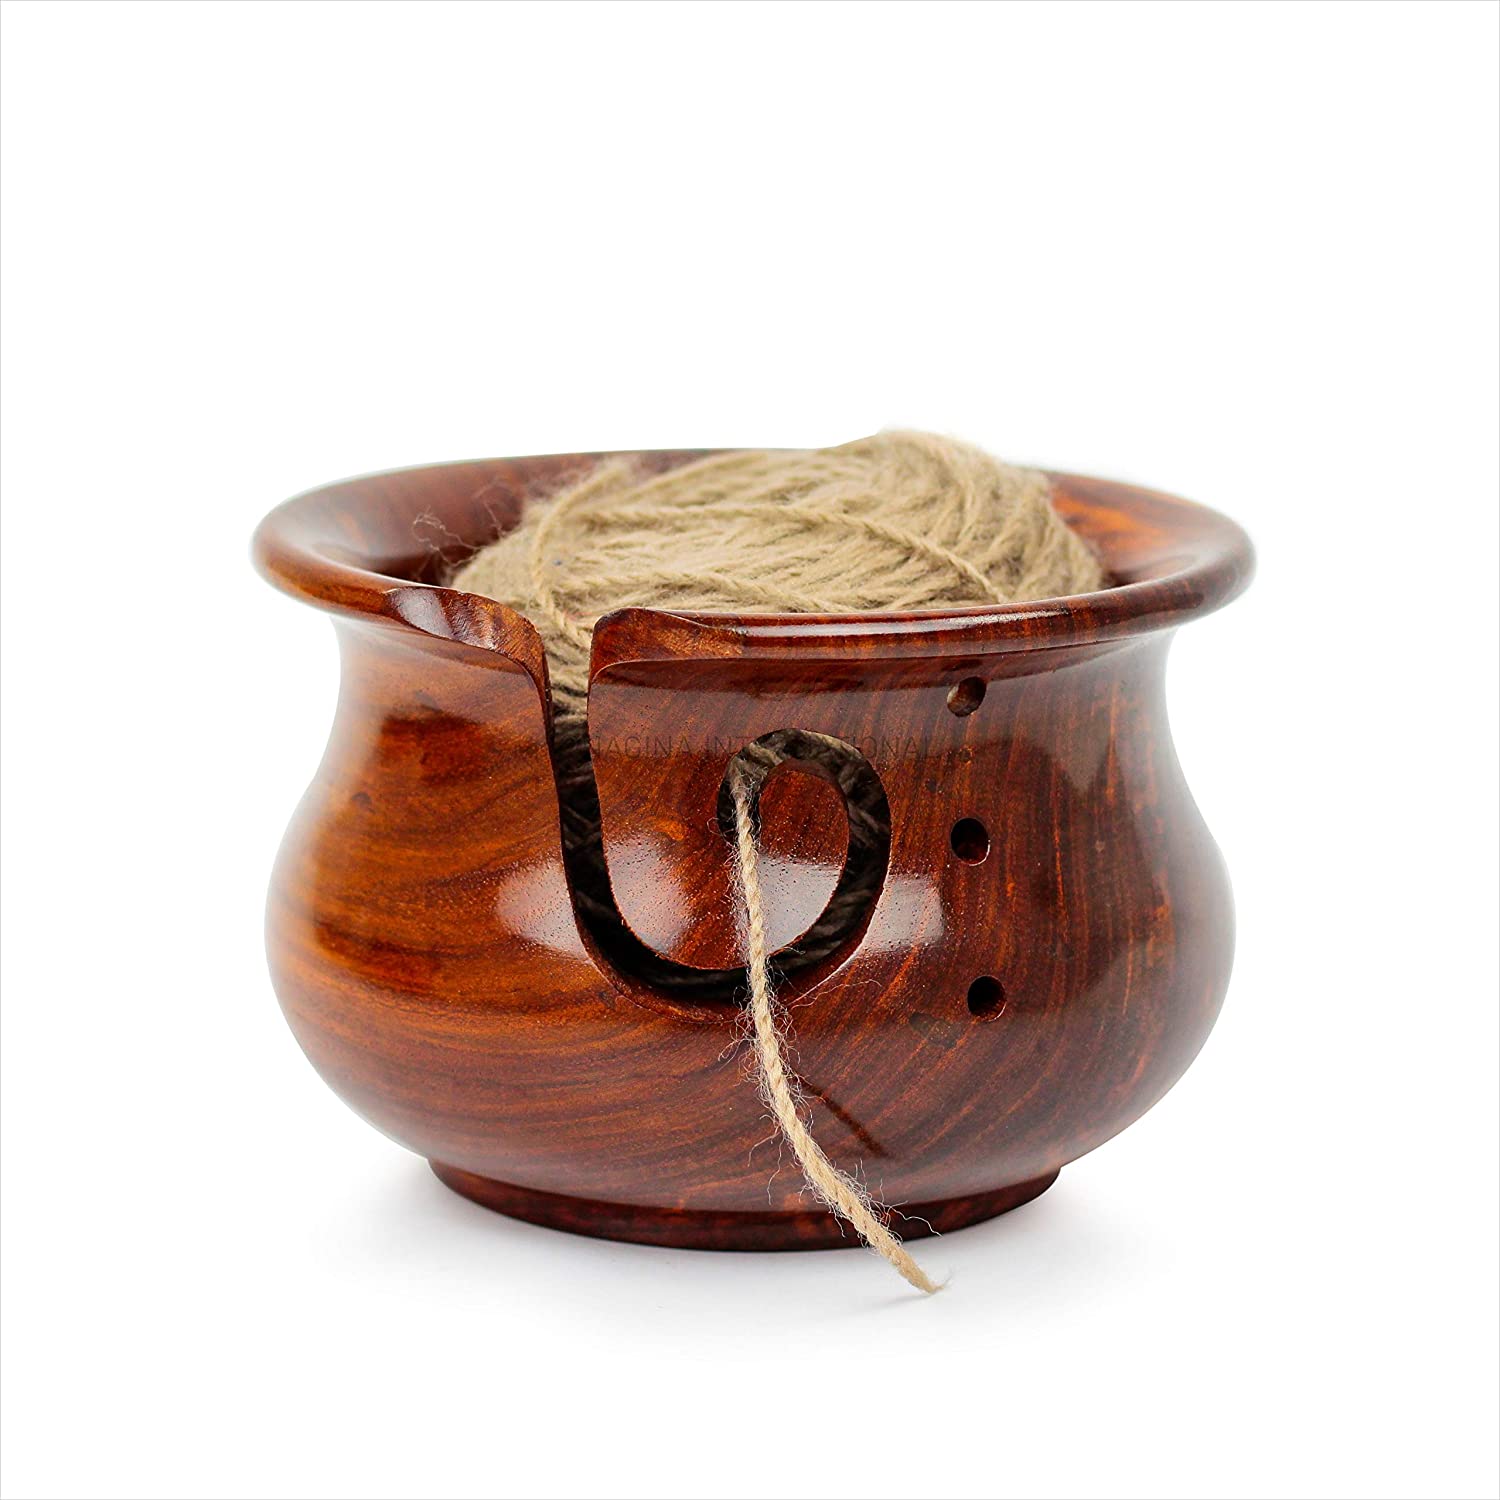 Kitchen Pot Styled Wooden Yarn Bowl with Holes | Premium Knitting Bowl